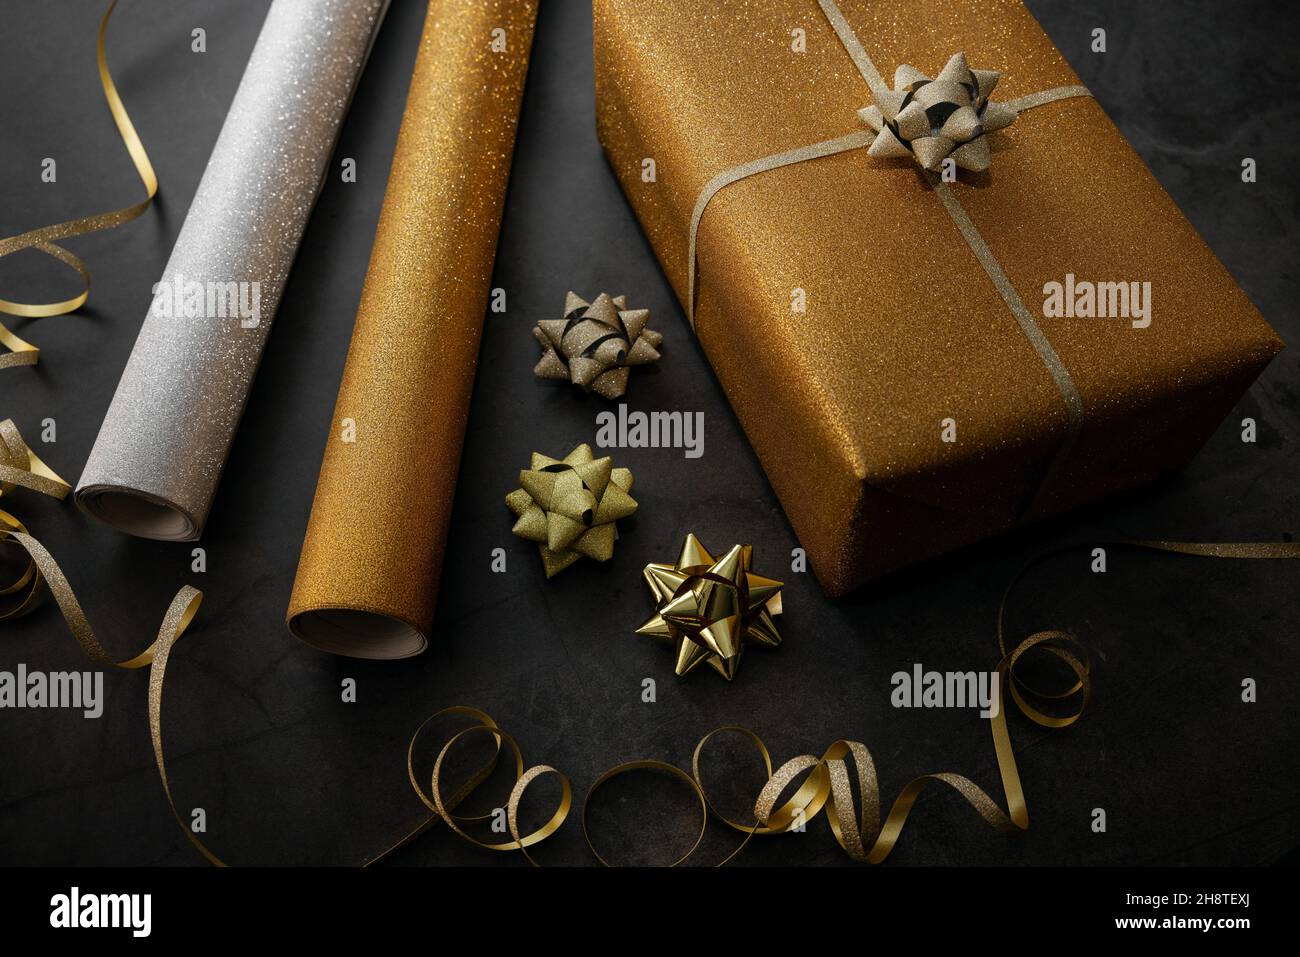 gift wrapping. wrapped golden present with wrapping paper rolls and accessories on black stone background Stock Photo